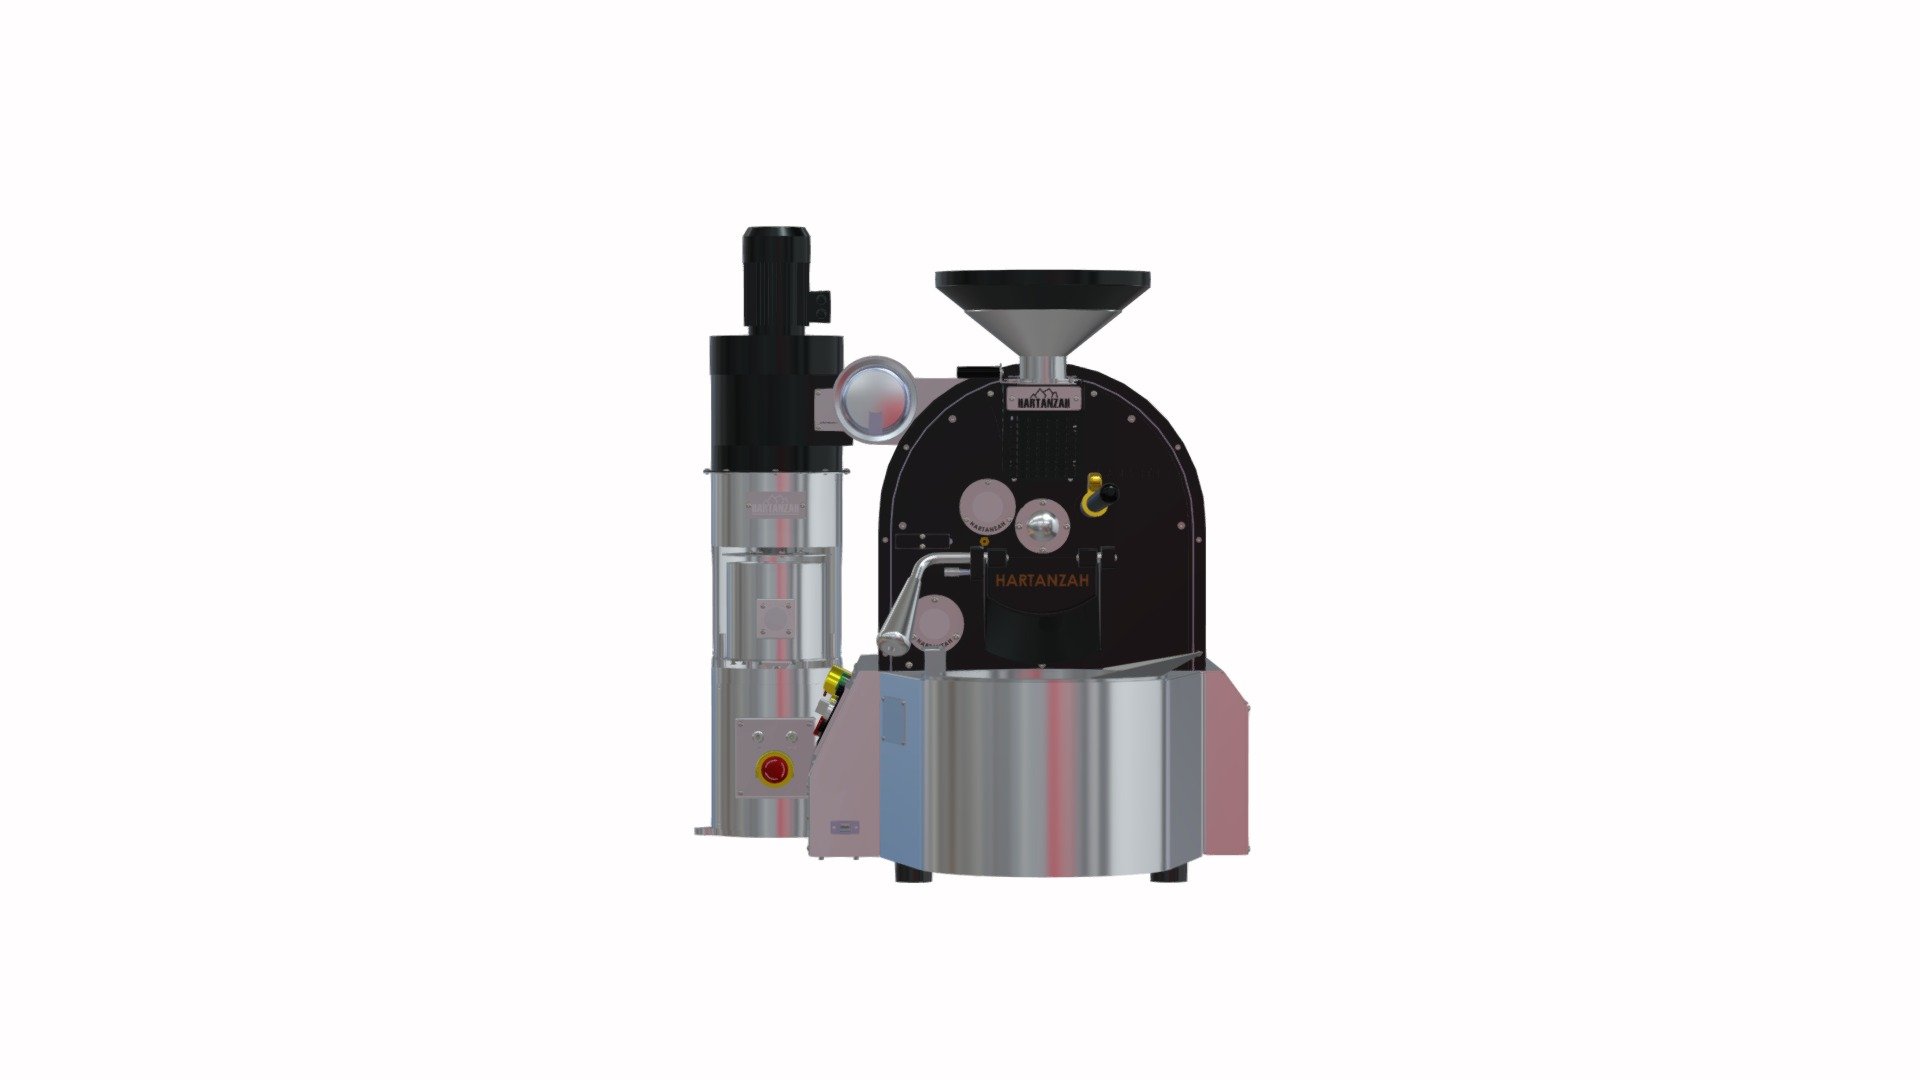 HARTANZAH DANISH 01 - 1 KG GAS AUTOMATIC COFFEE ROASTER

1 kg automatic shop coffee roaster. Built using the highest quality steel, cast iron combined with stainless steel material make Danish 01 become heavy-duty build coffee roaster.

Thermal and mechanism stability makes the continuous roasting process much easier with consistent results. Danish 01 is a perfect choice for roasting of high-quality specialty coffee.

Click this link to find more detail about Hartanzah Danish 01 - Hartanzah Danish 01 - 1 Kg Gas Coffee Roaster - 3D model by Hartanzah 3d model